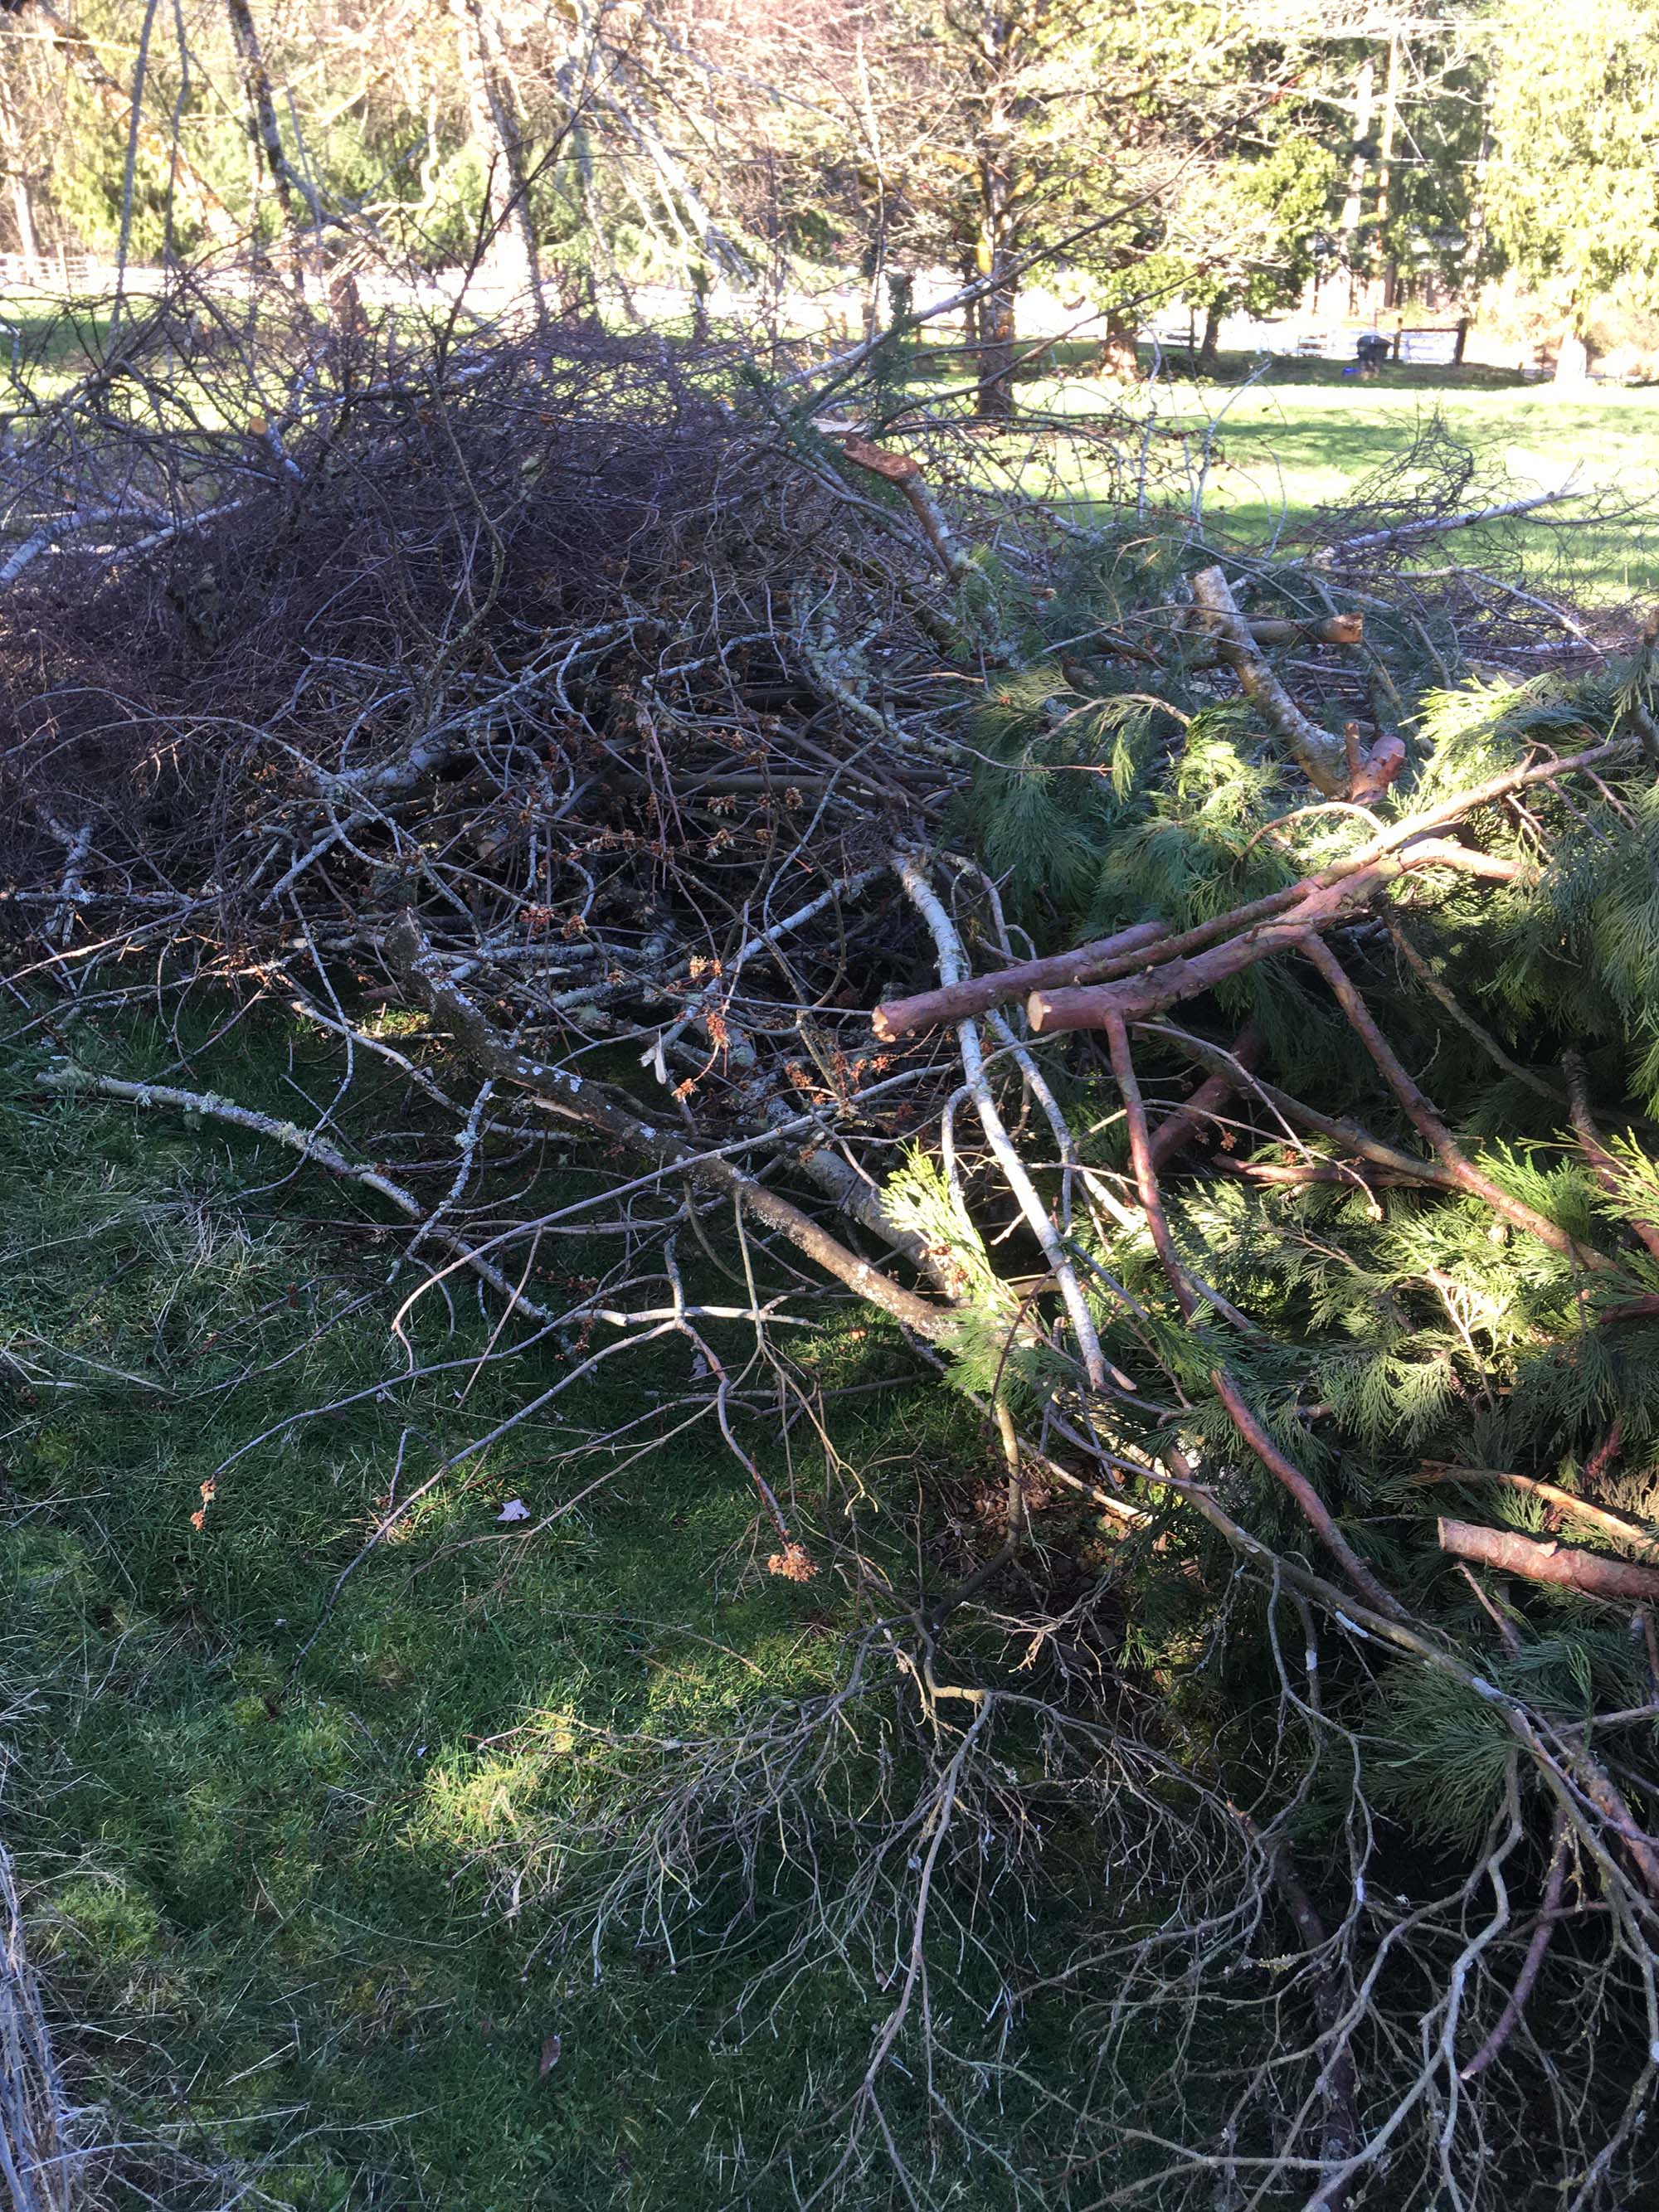 A pile of tree branches from the storm, incense cedar branches in the front and deciduous, leafless branches in the back